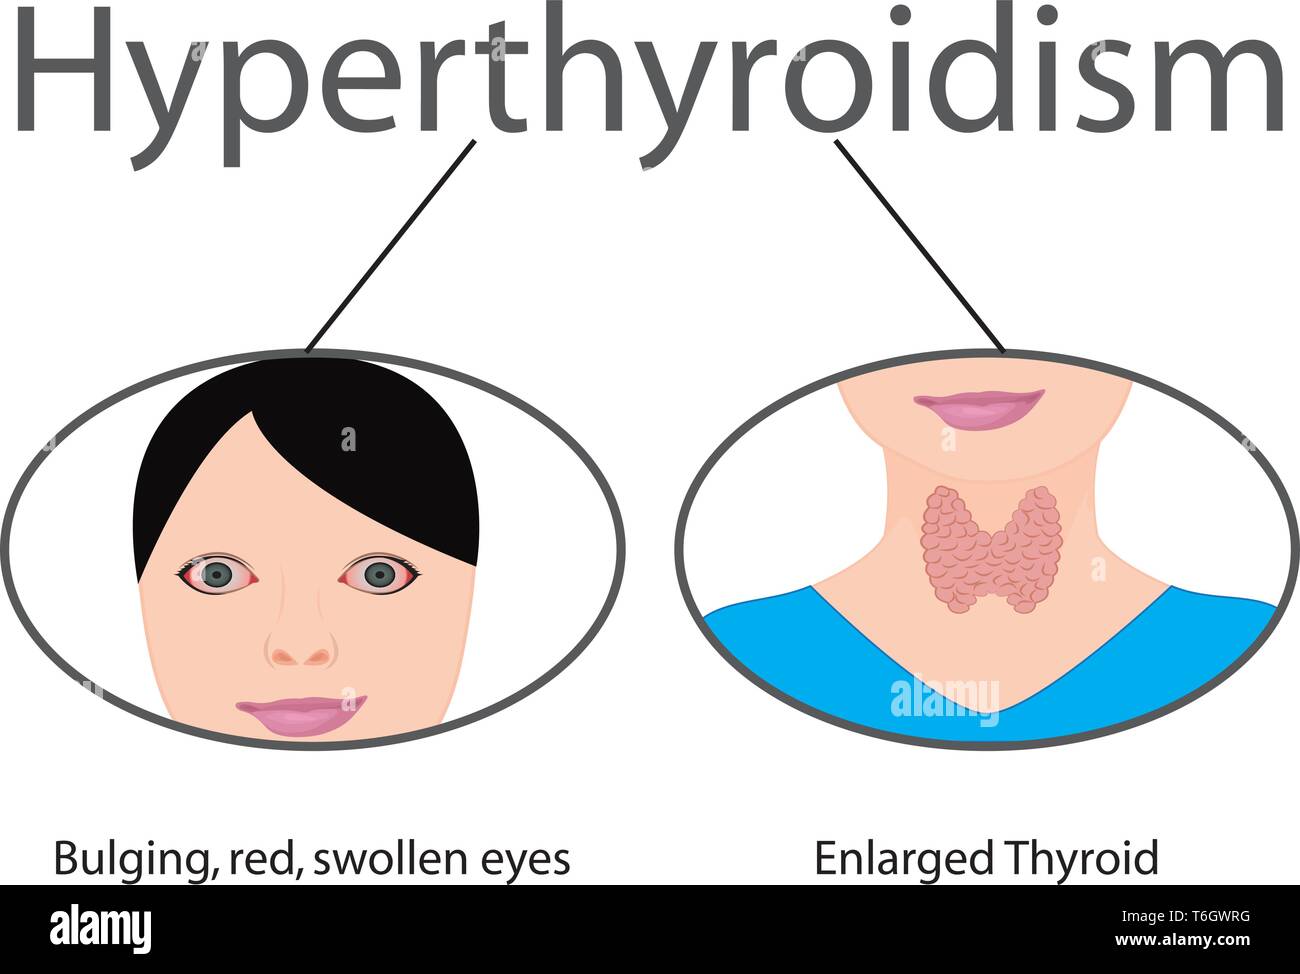 Hyperthyroidism. . Enlarged Thyroid. Endocrine disfunction vector illustration on a white background. Stock Vector